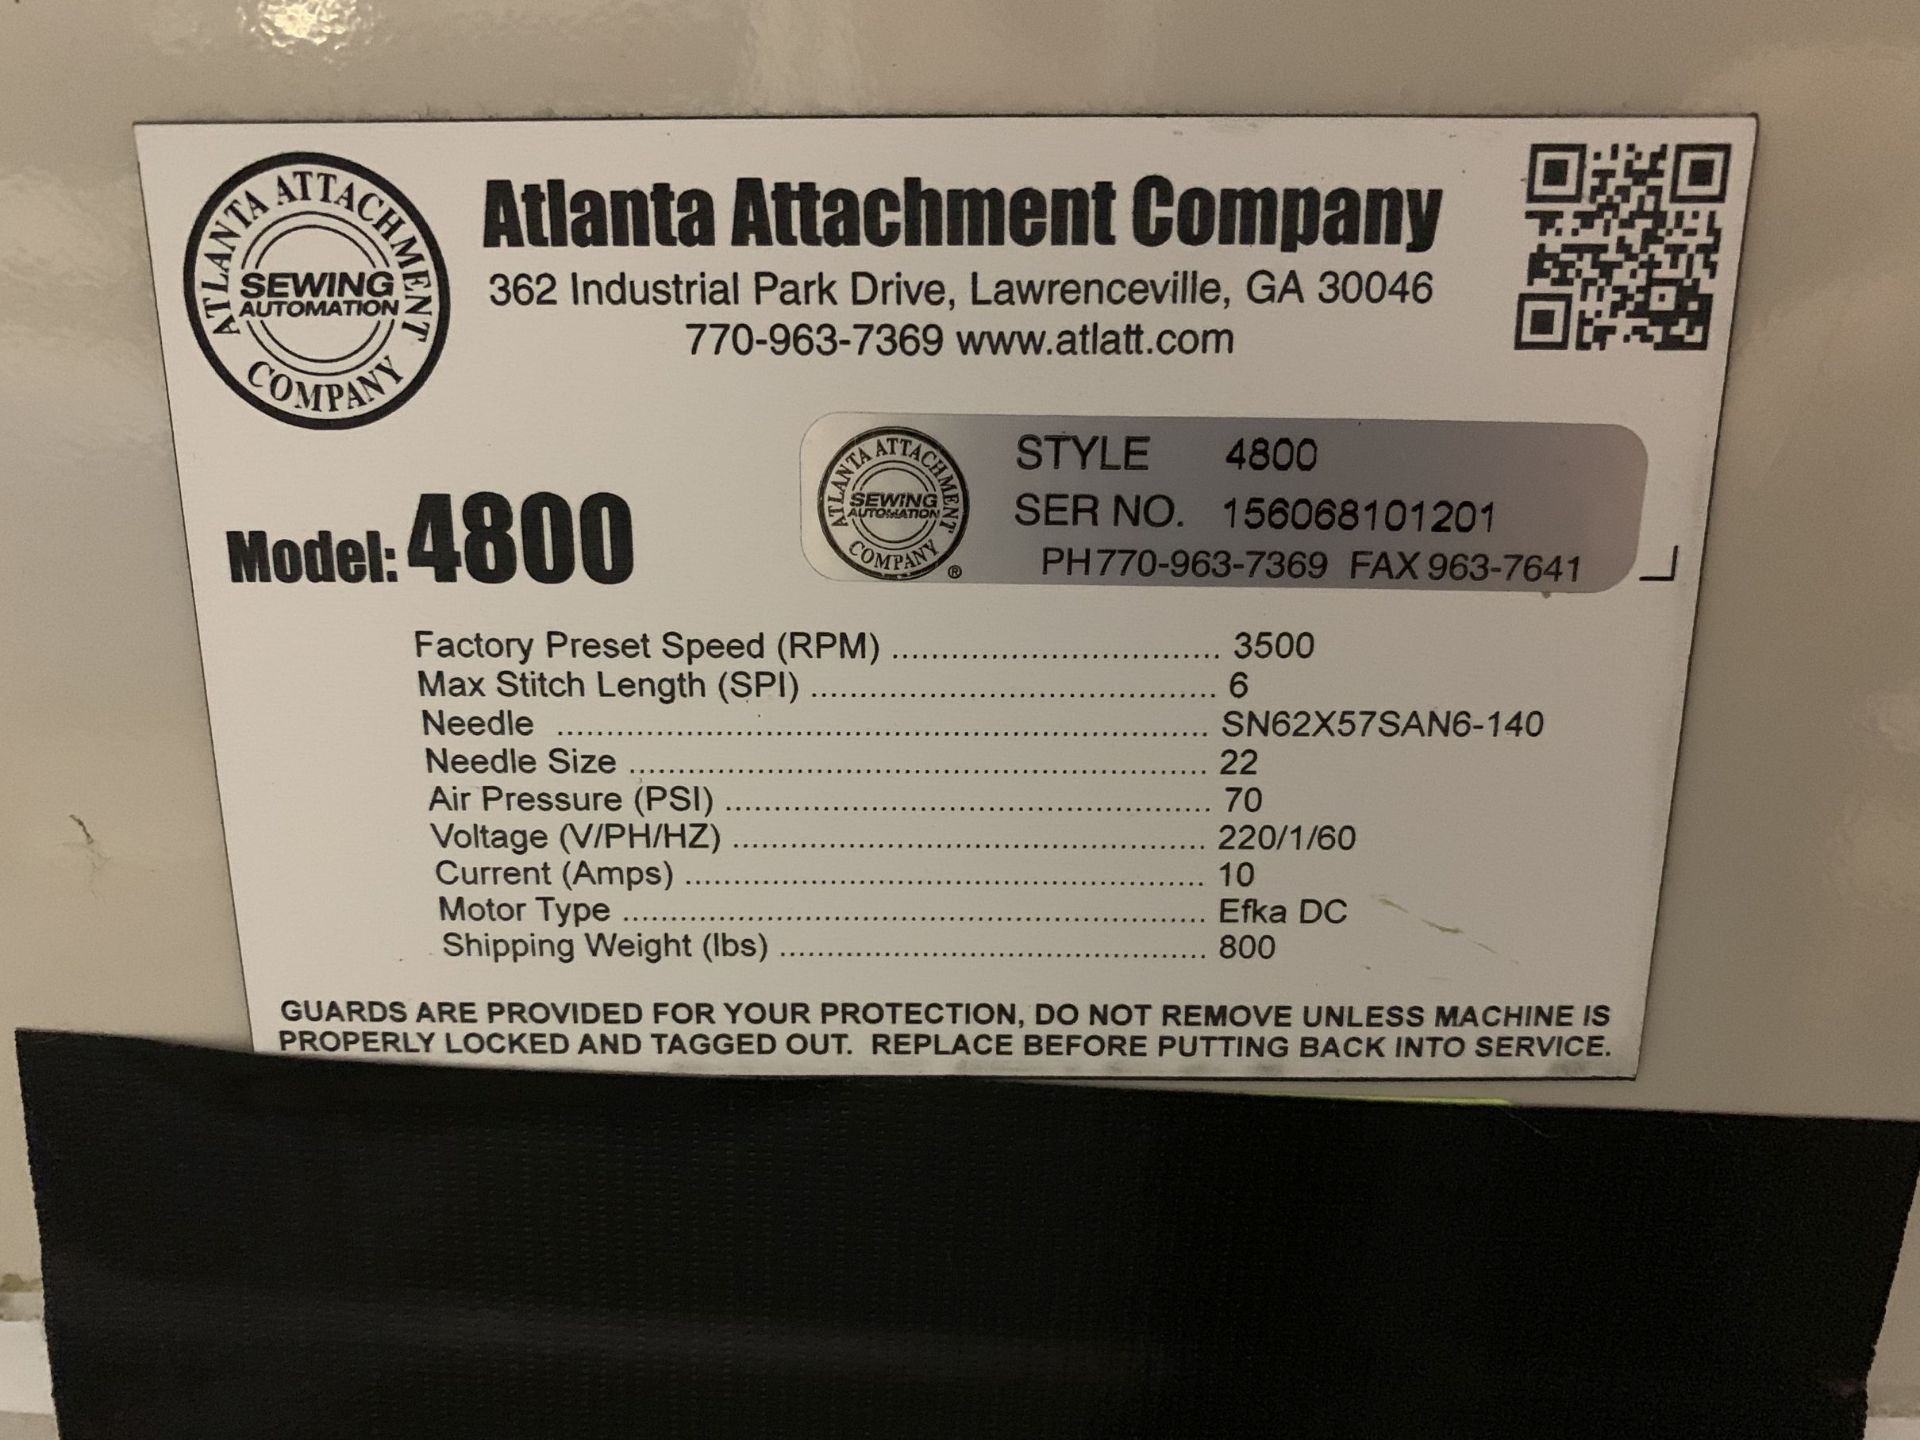 ATLANTA ATTACHMENT MODEL 4800 SEWING MACHINE; S/N 156068120201 - Image 8 of 9